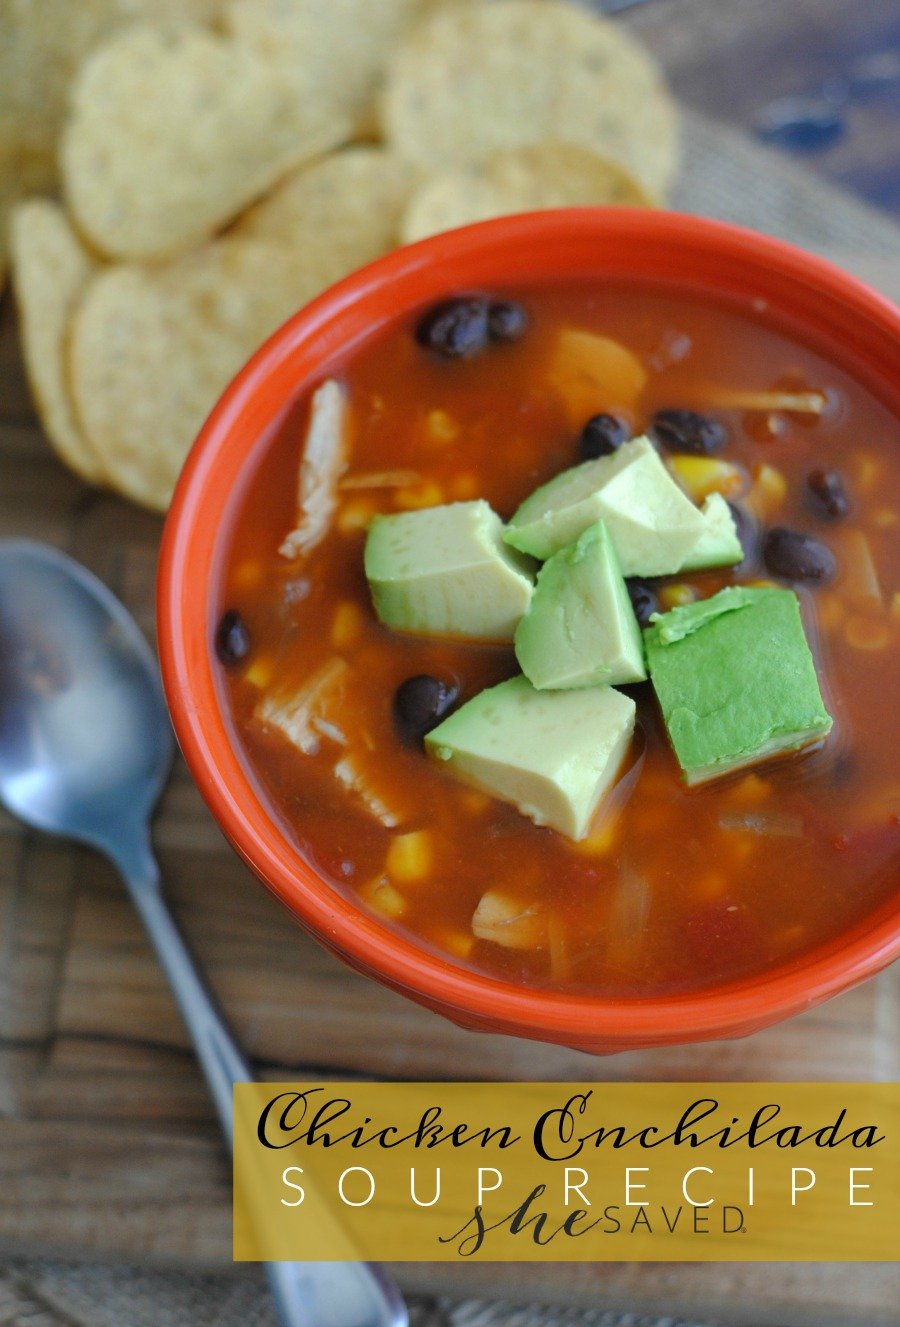 If you are looking for a delicious and simple meal idea, my easy Chicken Enchilada Soup recipe is perfect! A wonderful comfort food that is easy on the budget and will be a family favorite!